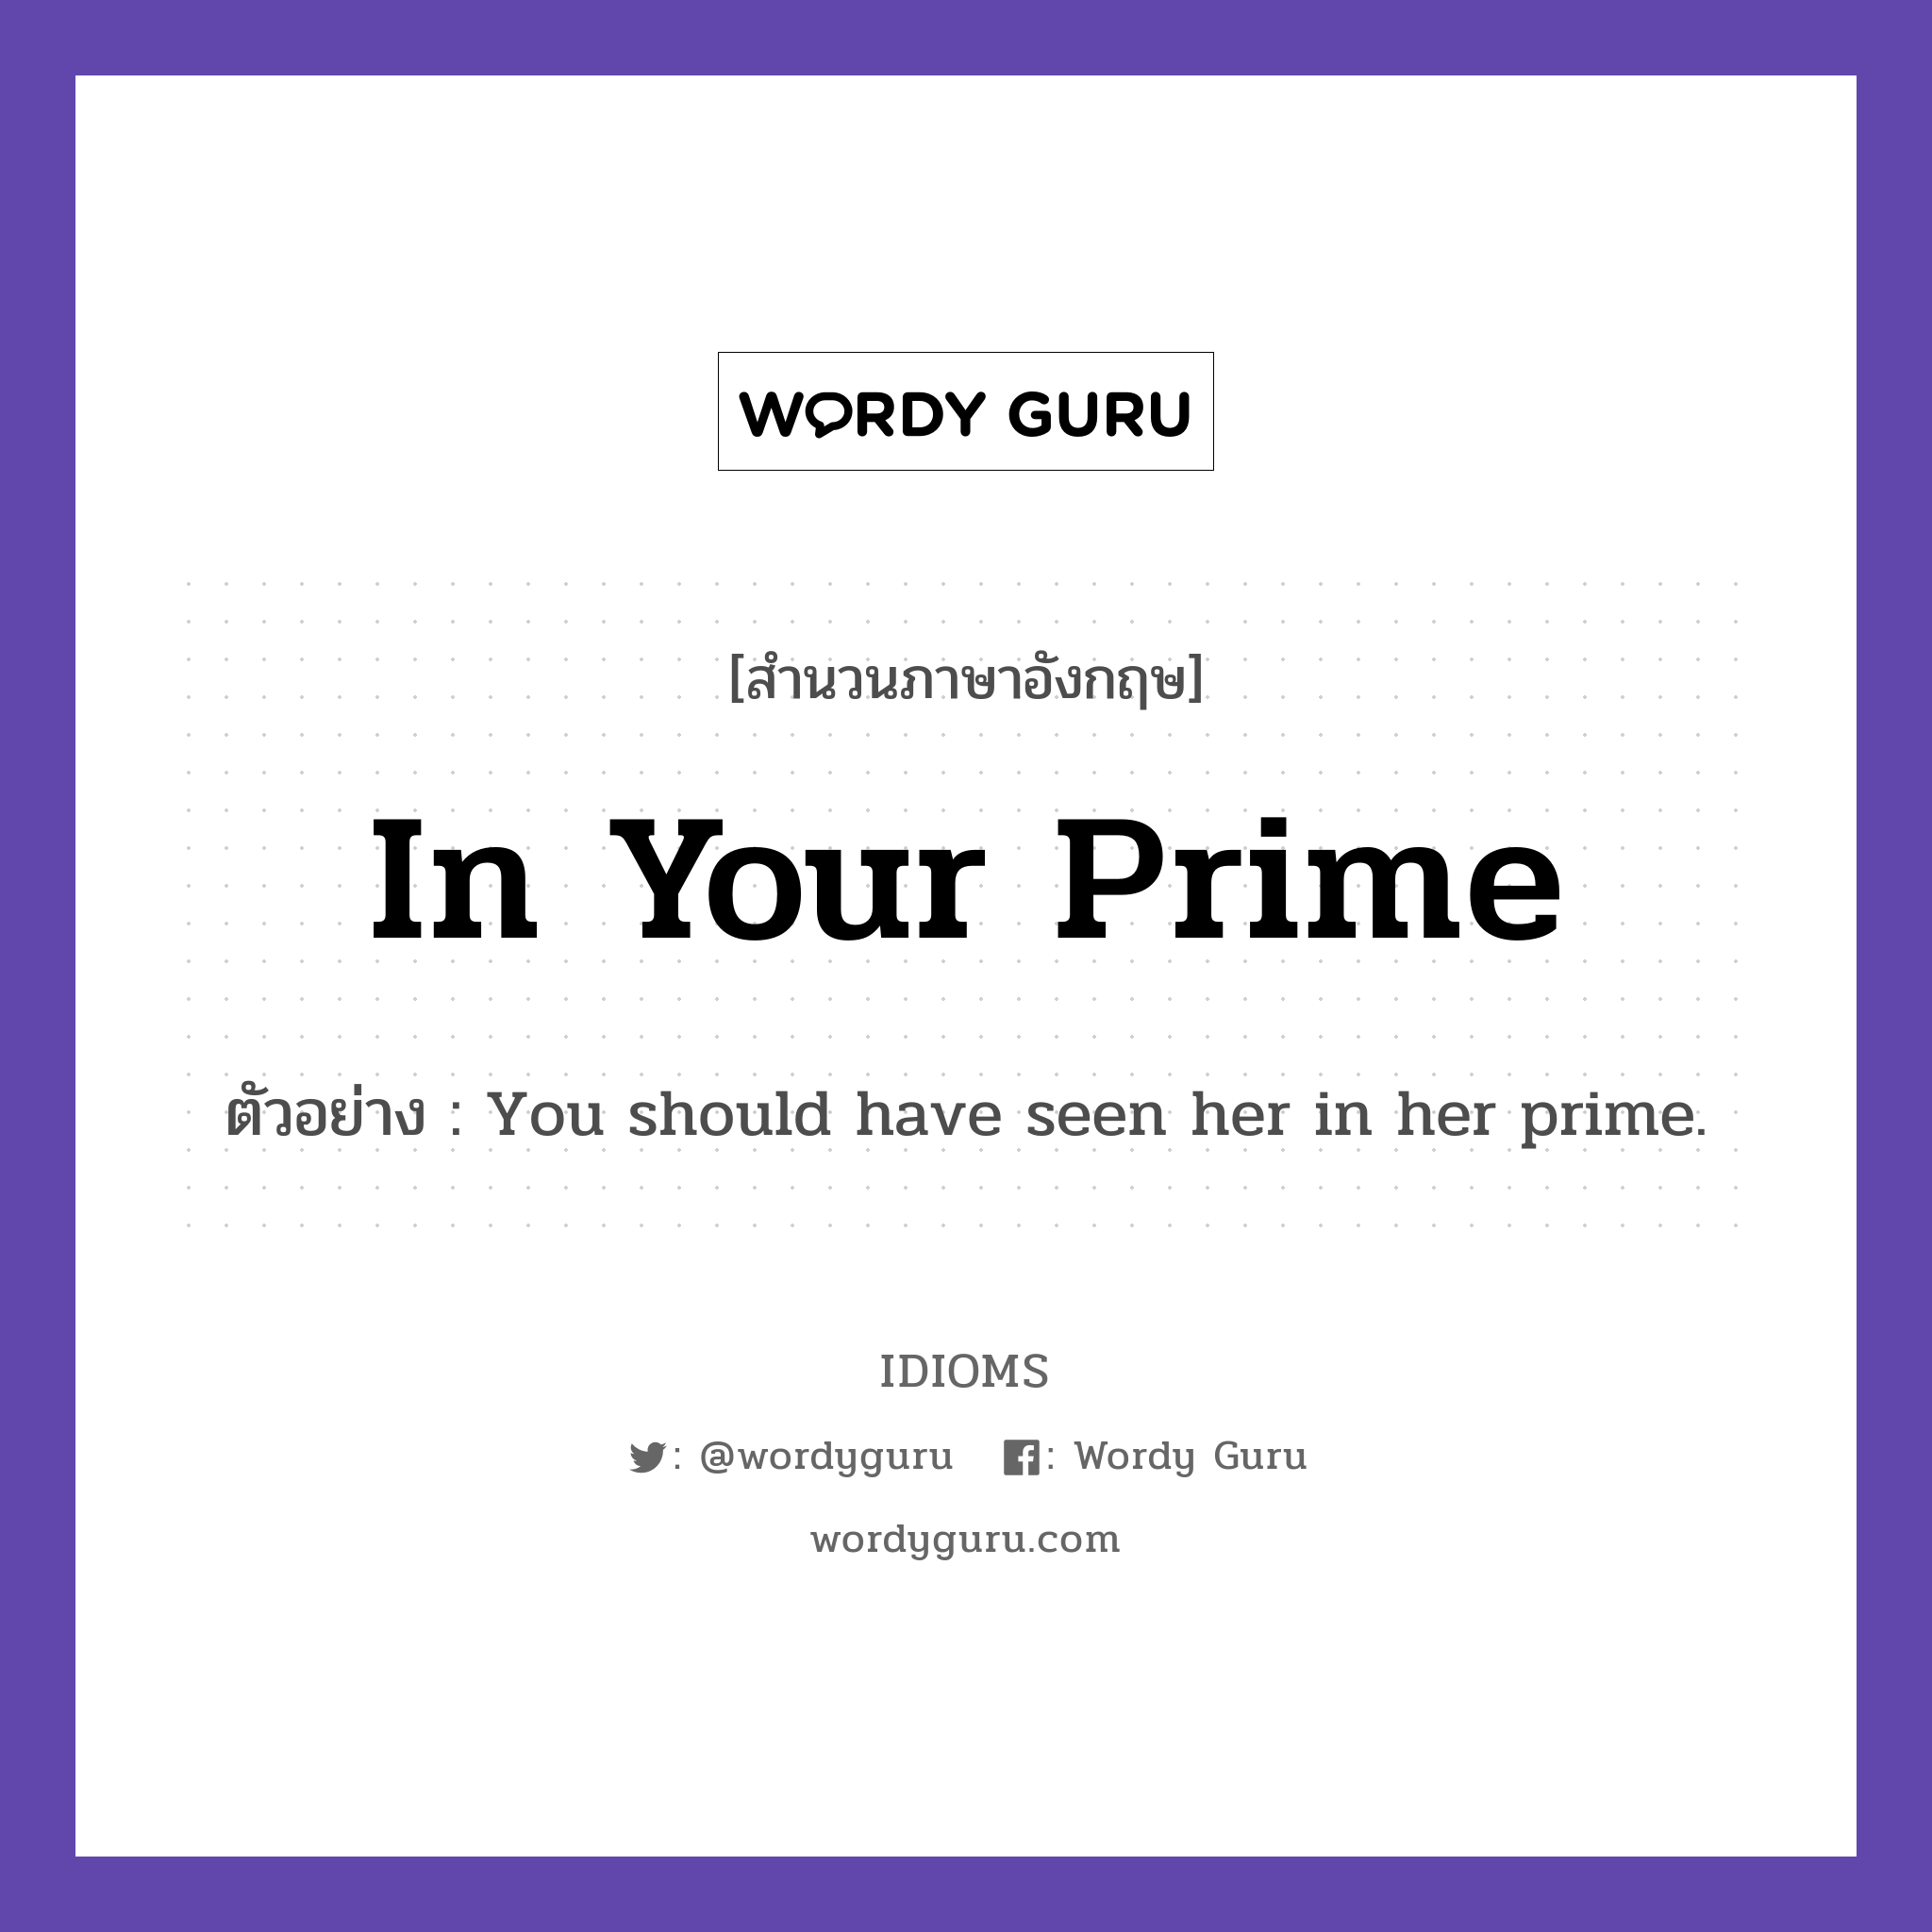 In Your Prime แปลว่า?, สำนวนภาษาอังกฤษ In Your Prime ตัวอย่าง You should have seen her in her prime.